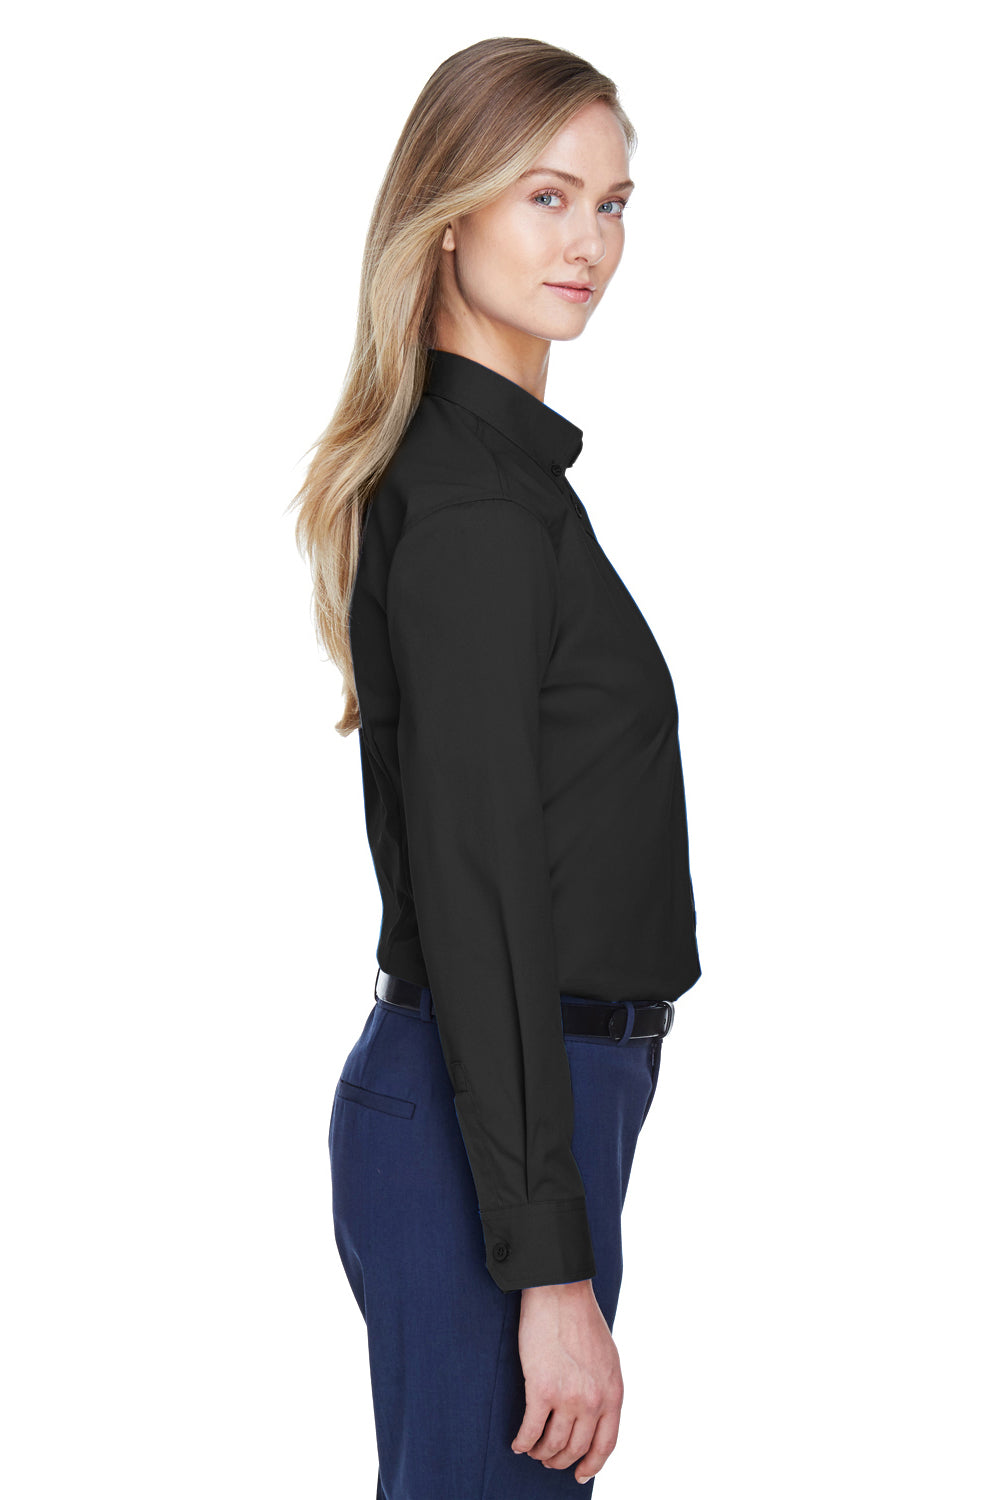 Core 365 78193 Womens Operate Long Sleeve Button Down Shirt Black Side